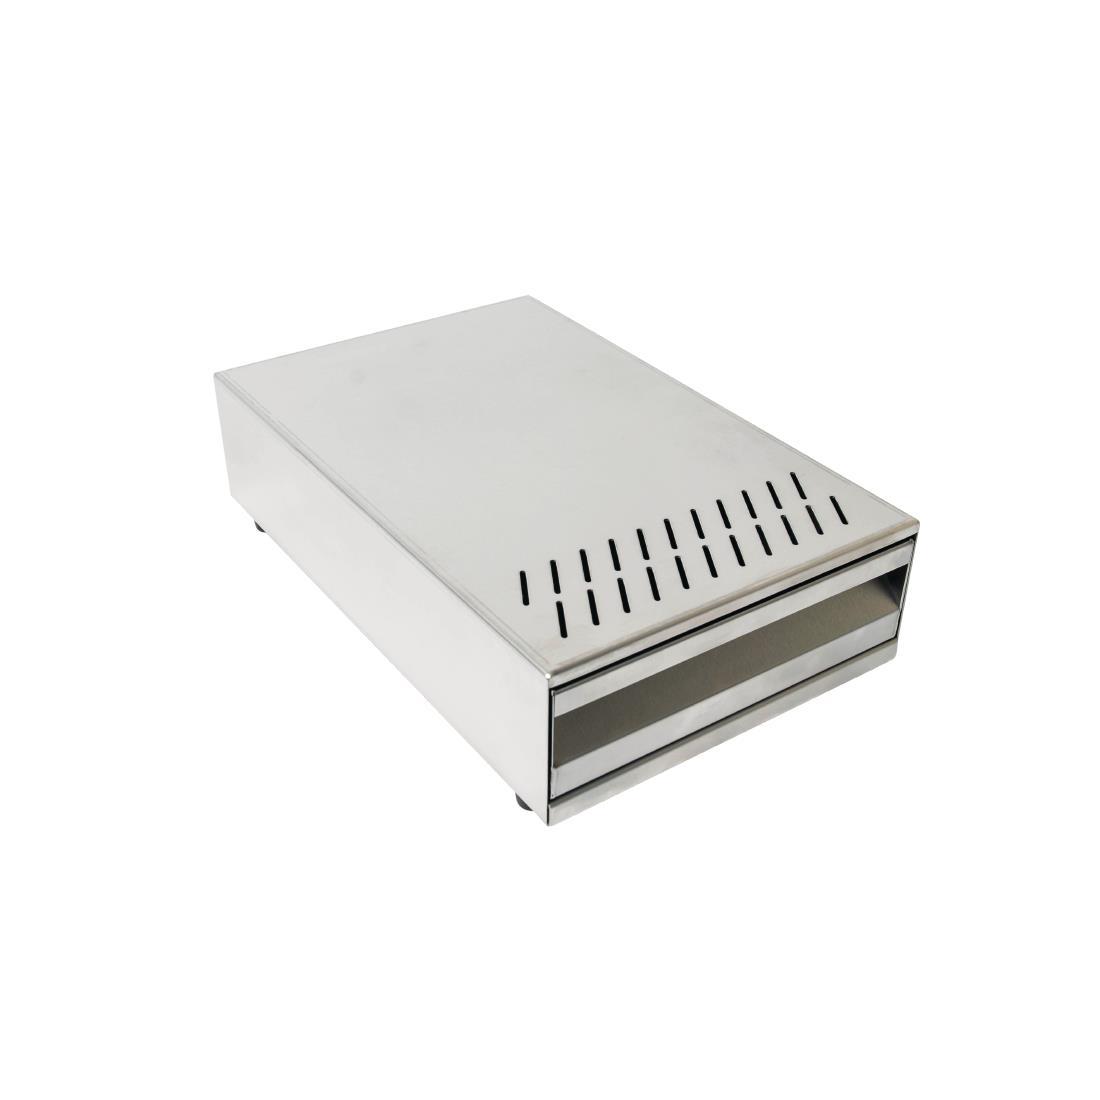 Premium Stainless Steel Knock Out Box - HC559  - 1